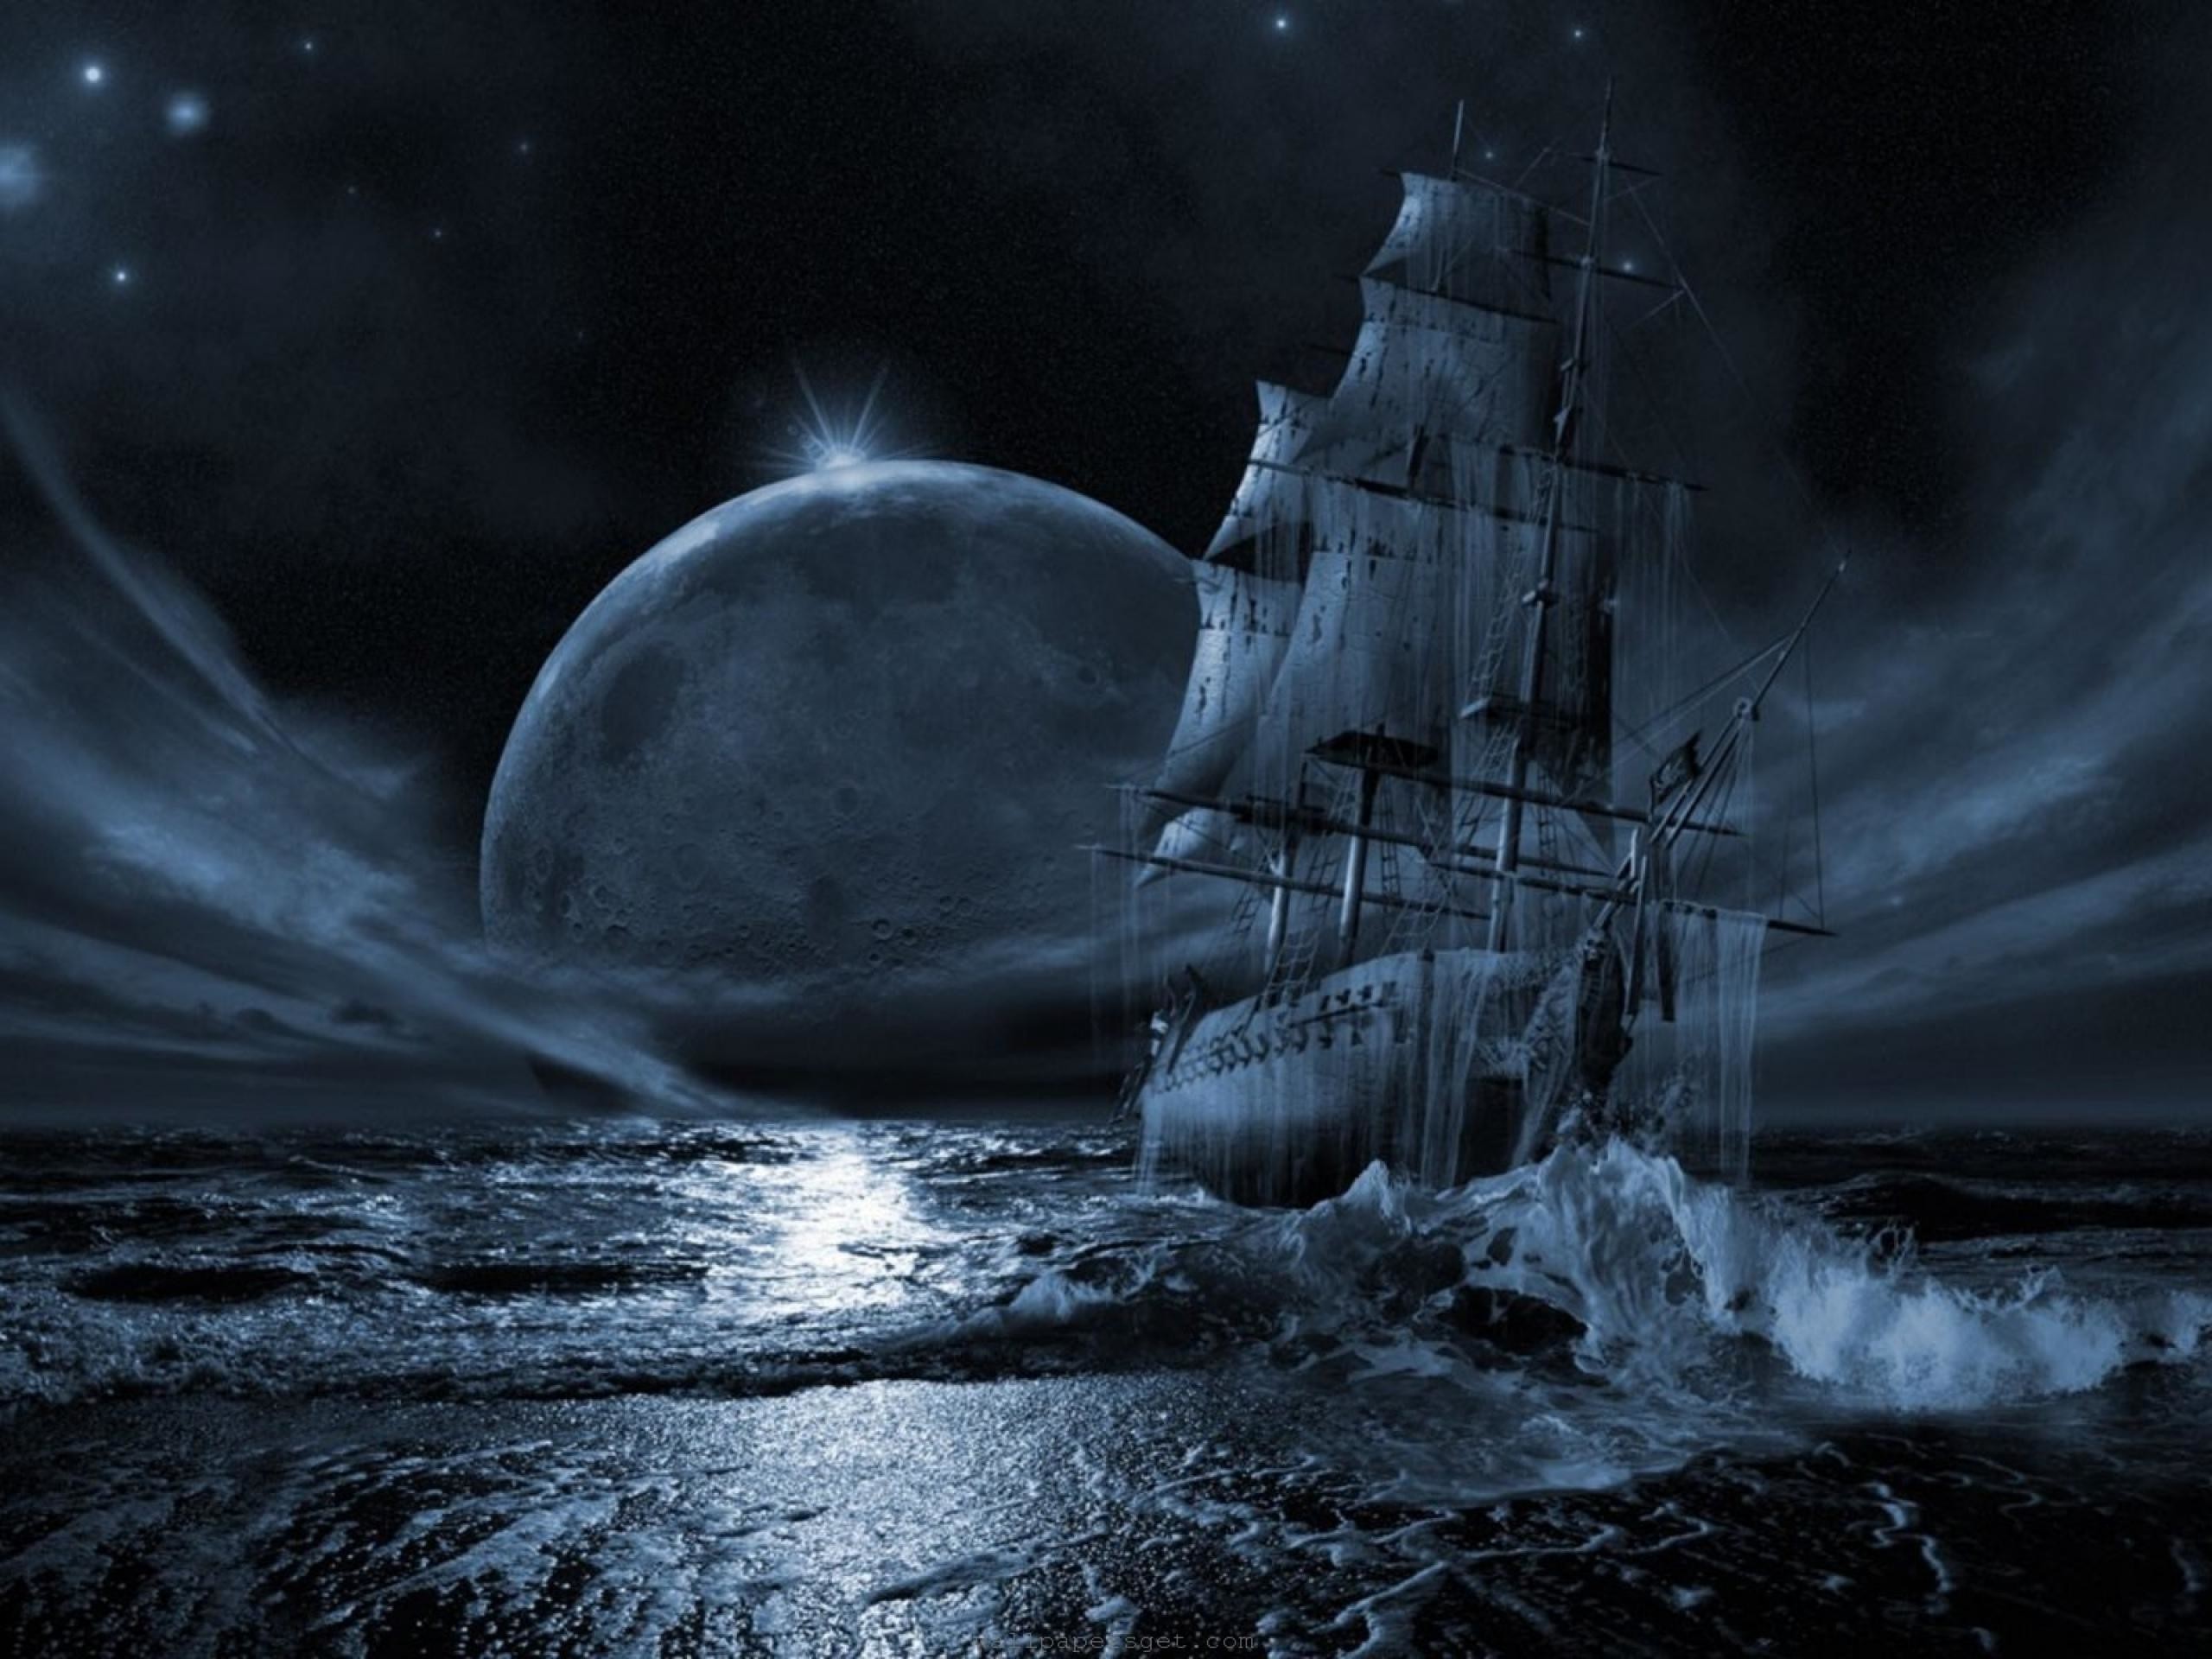 2560x1920 boat wallpaper backgrounds | High Definition Ghost Ship Largxjpg Background  Titanic